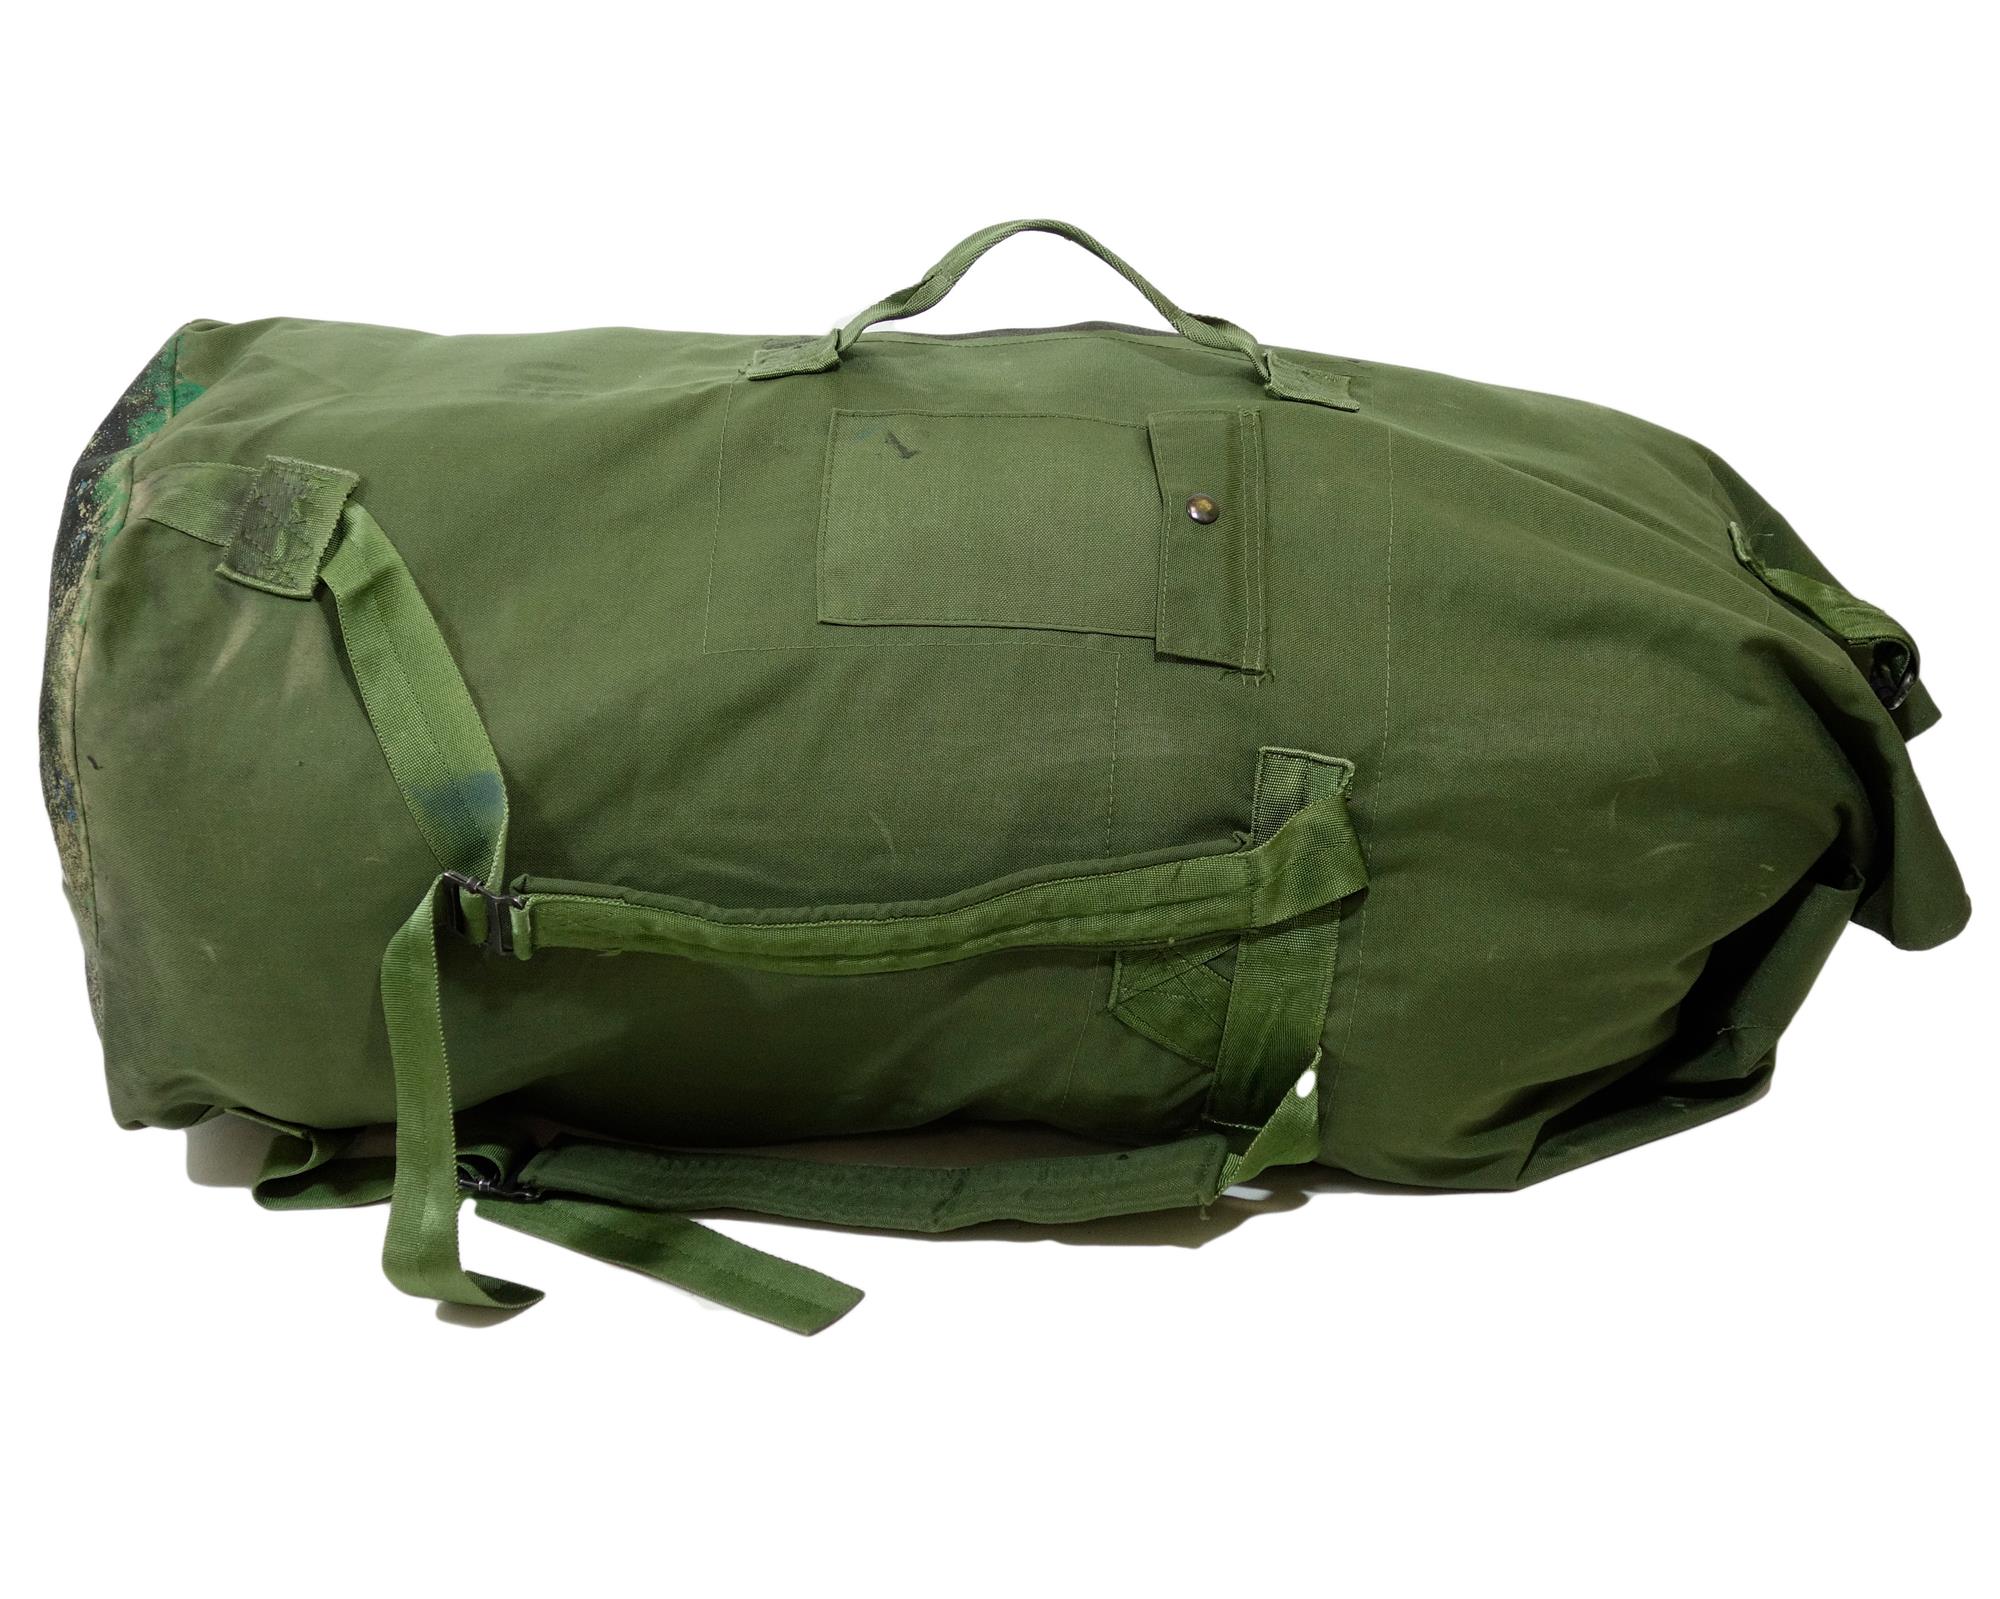 US Army Surplus Large Duffle Bag With Shoulder Straps Carrying Handle - Surplus & Lost